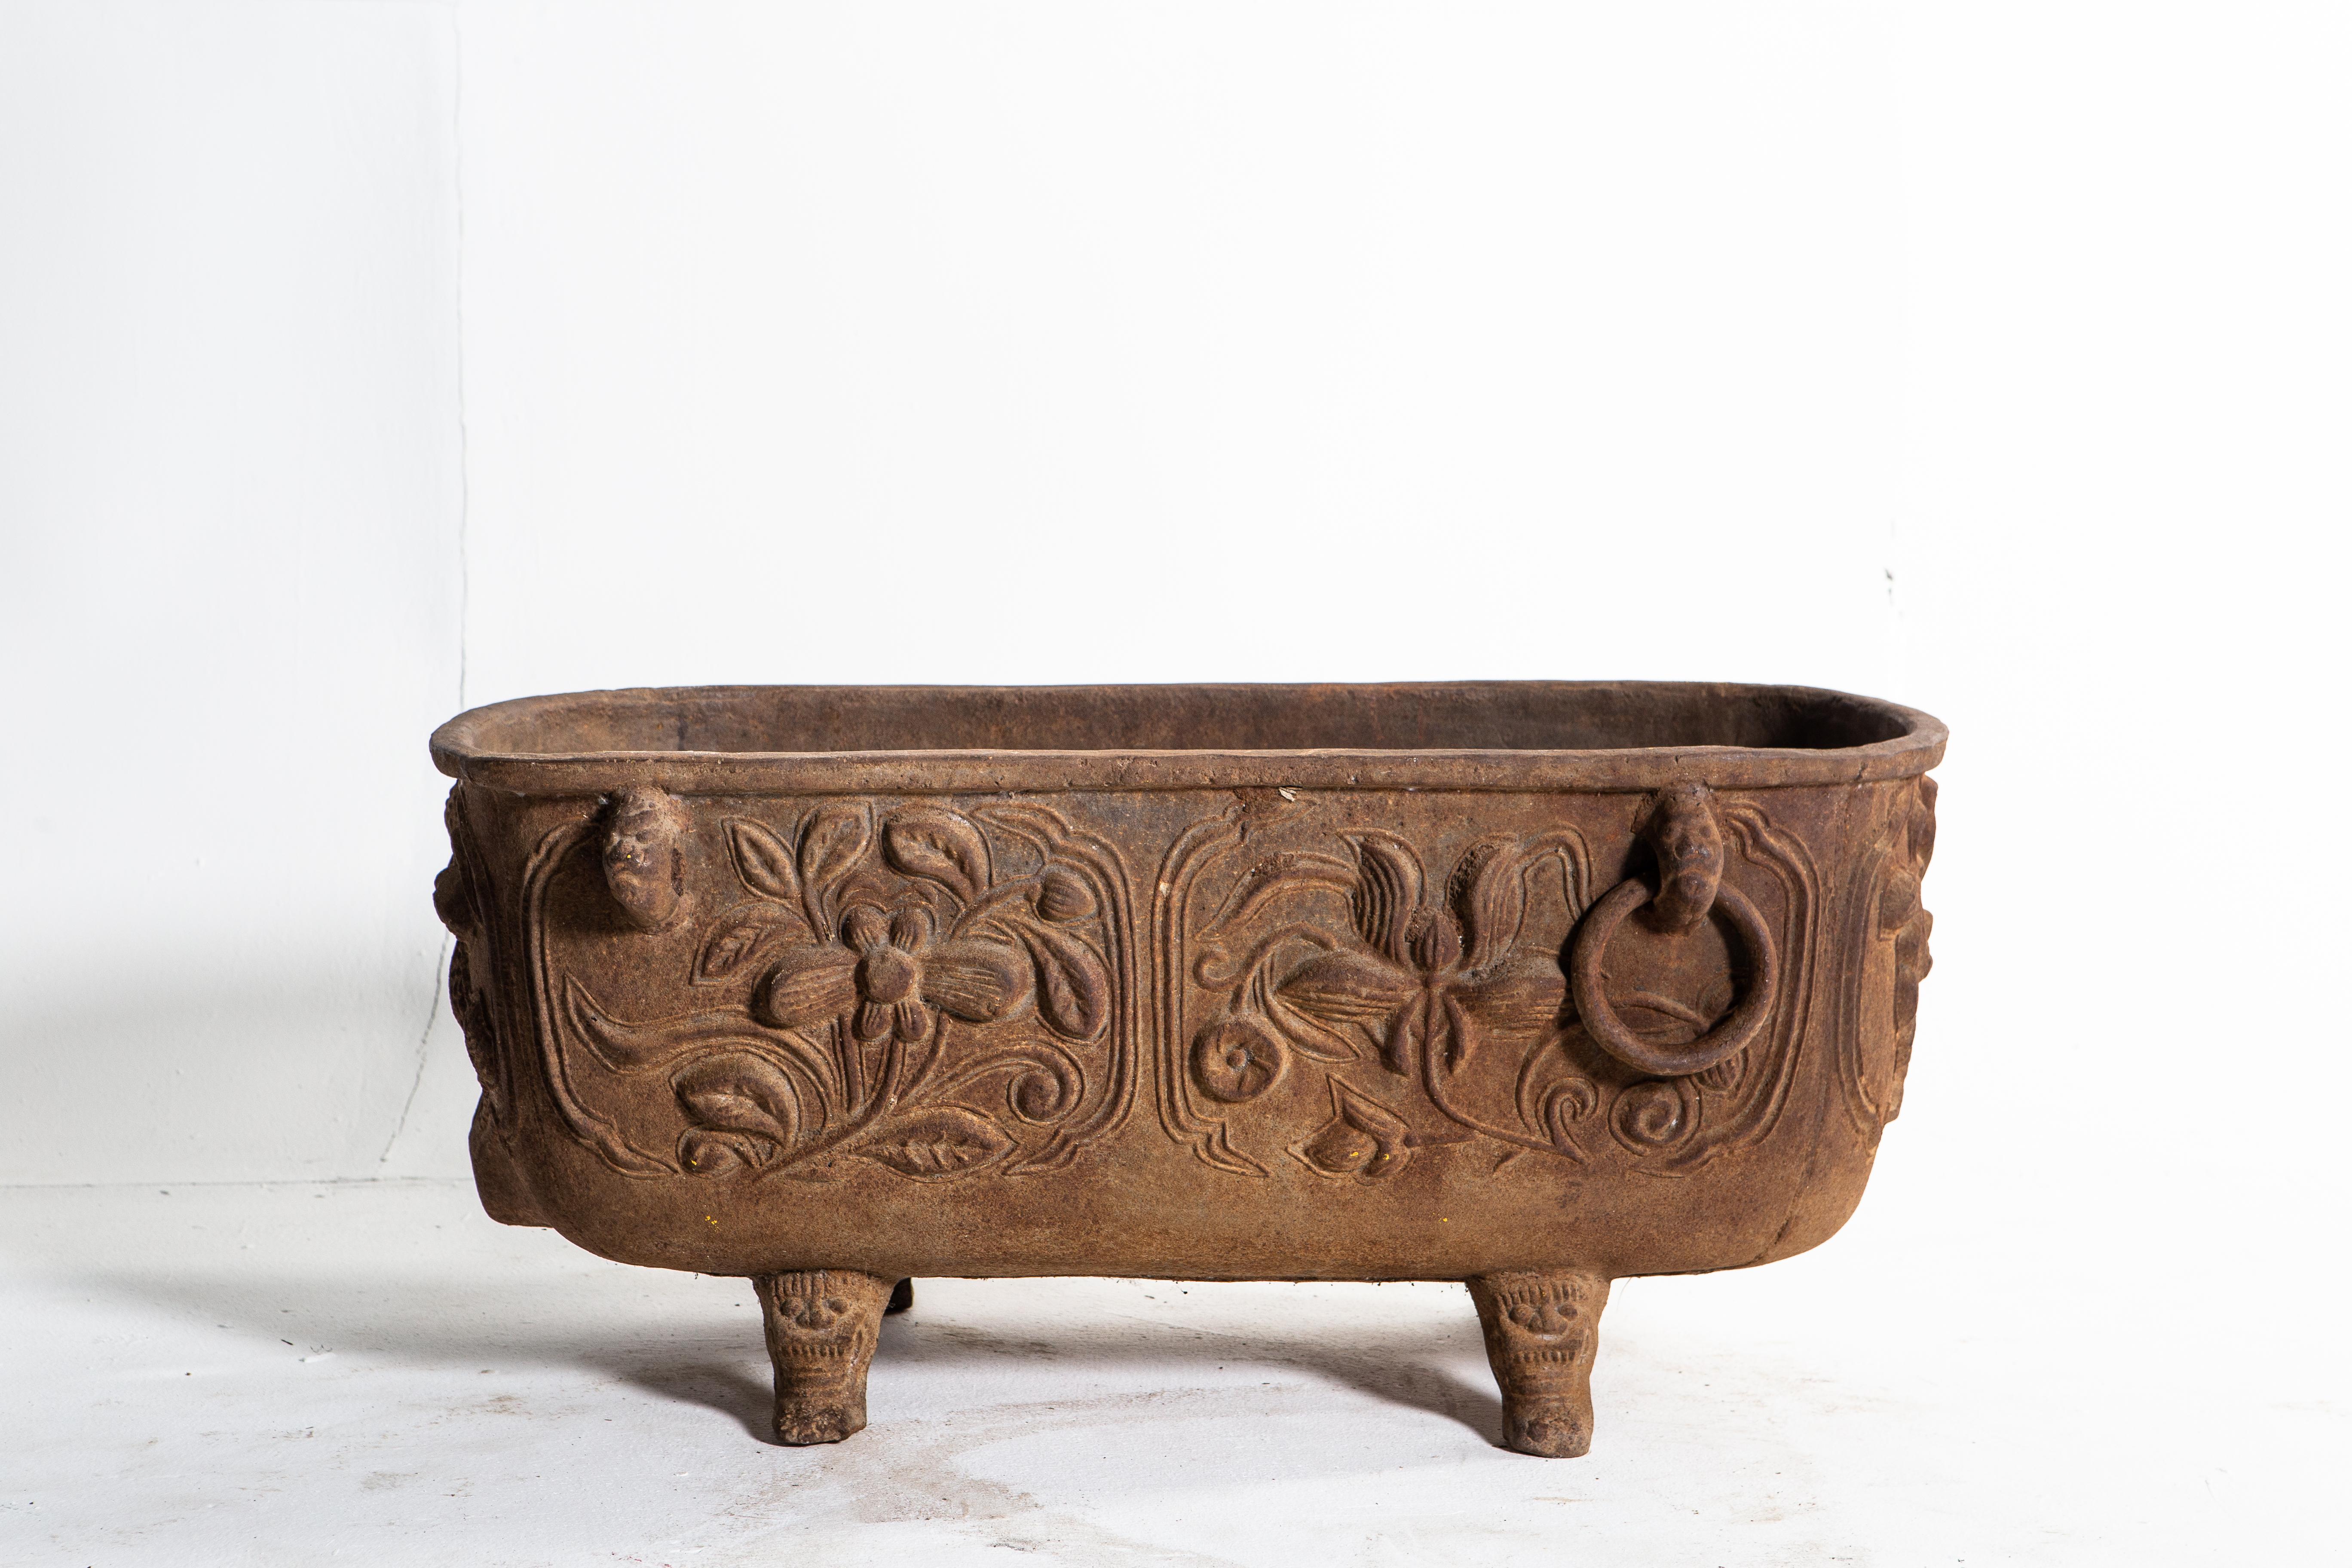 This impressive cast iron flower pot fittingly depicts floral motifs. At nearly three feet in length, the piece is a practical addition to a home garden.